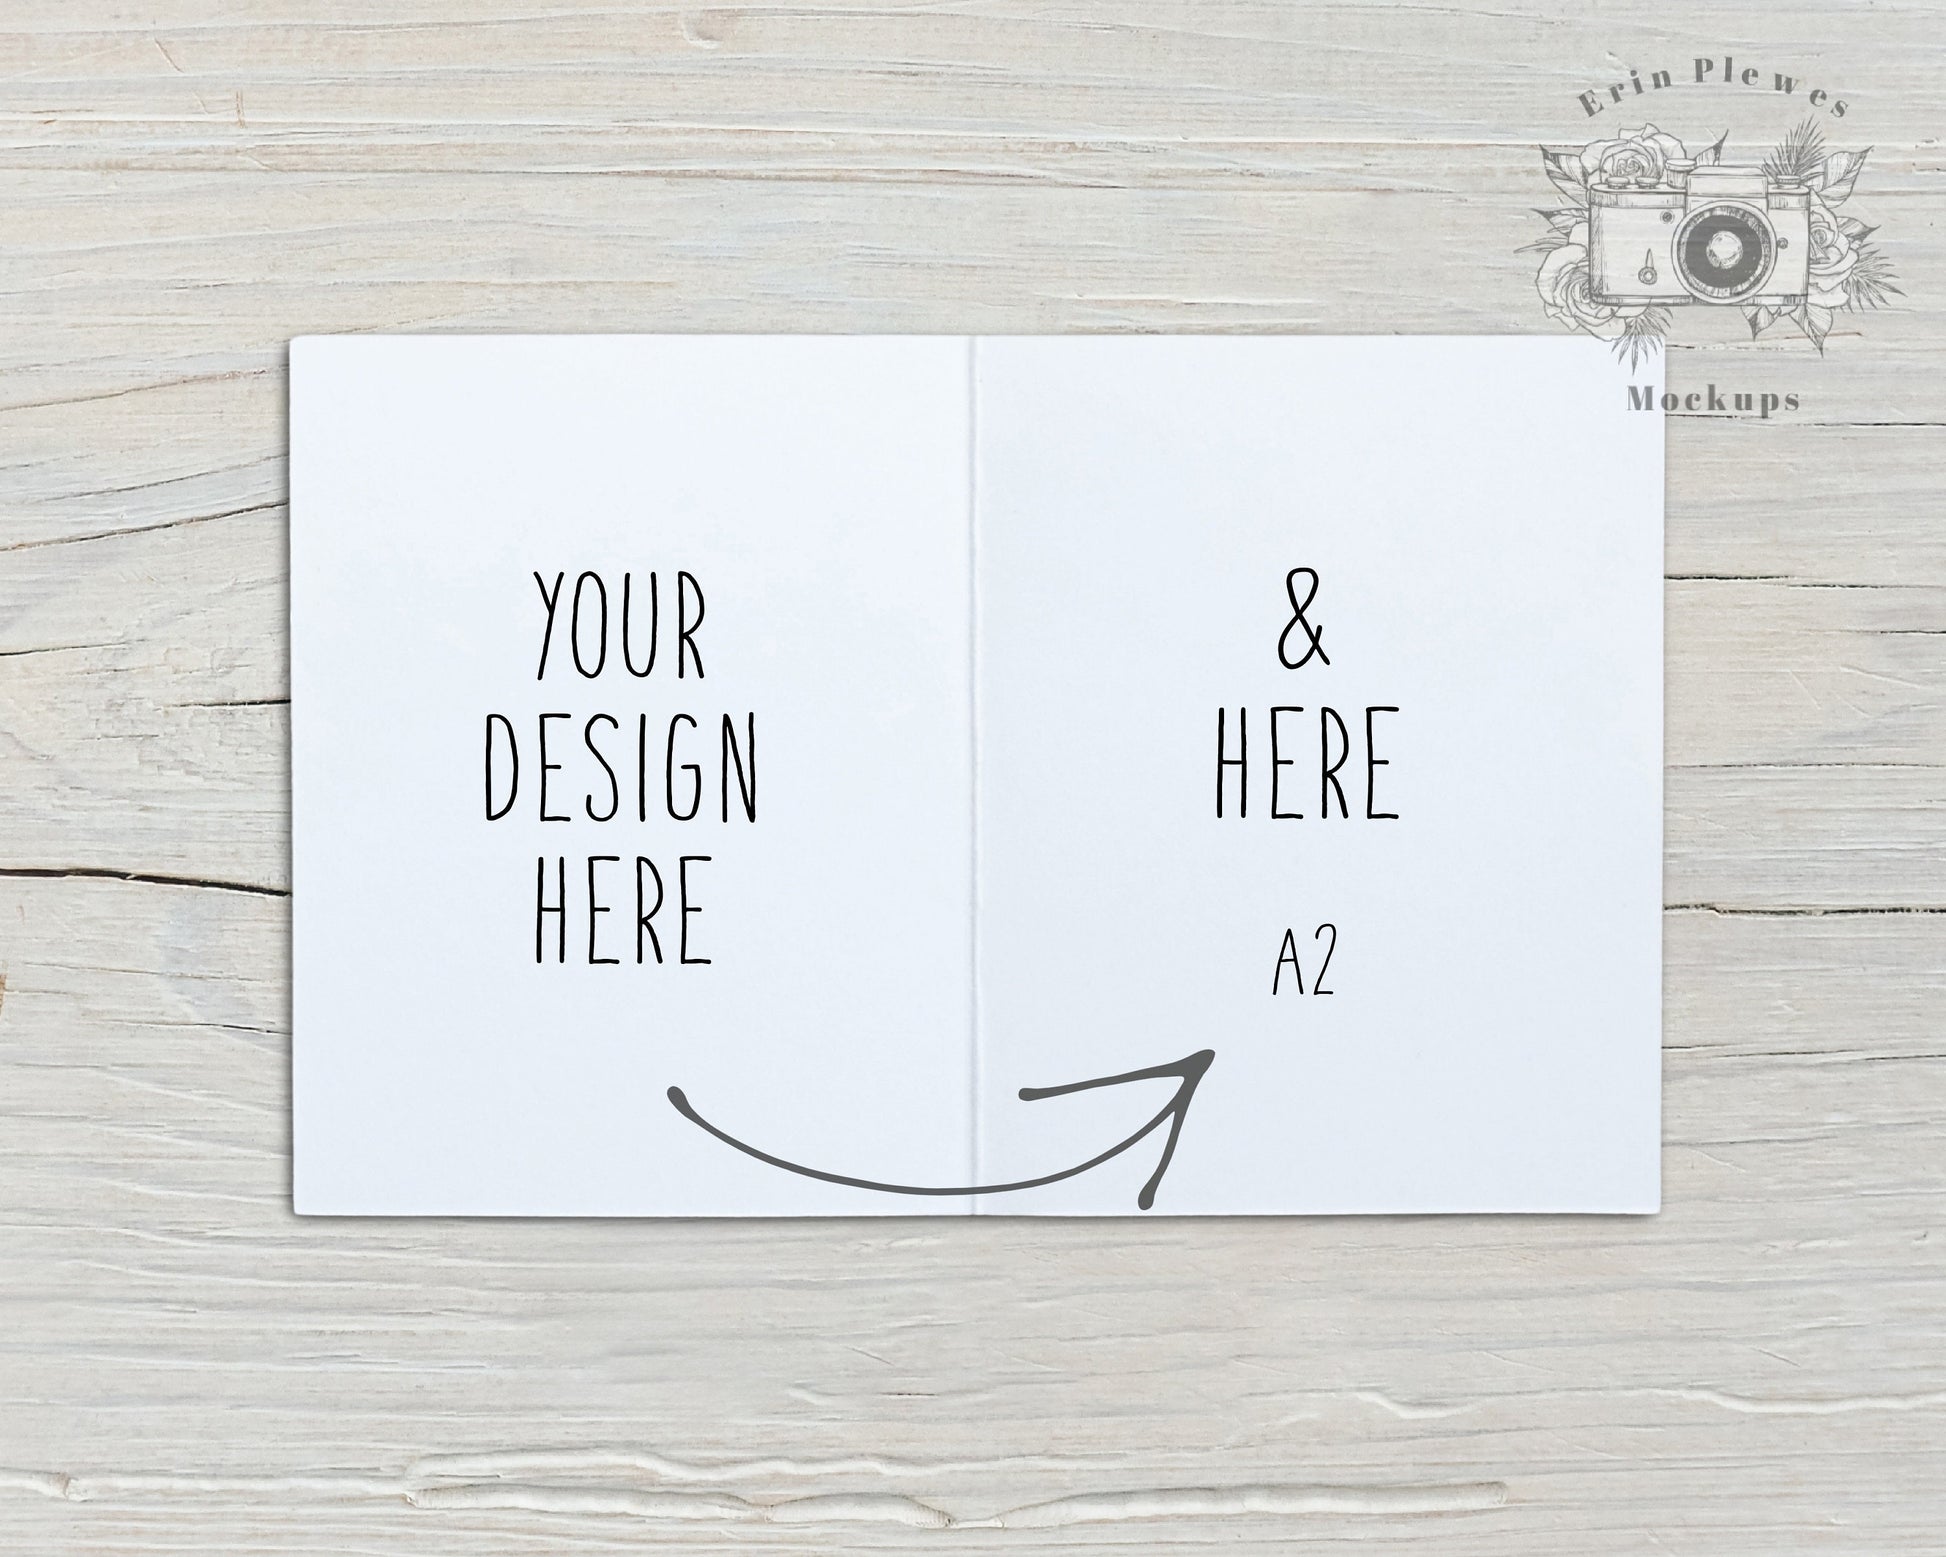 Open Card Mockup A2, Front and Back Greeting Card Mock-up for Rustic Wedding, Interior Card Stock Photo, Jpeg Instant Digital Download